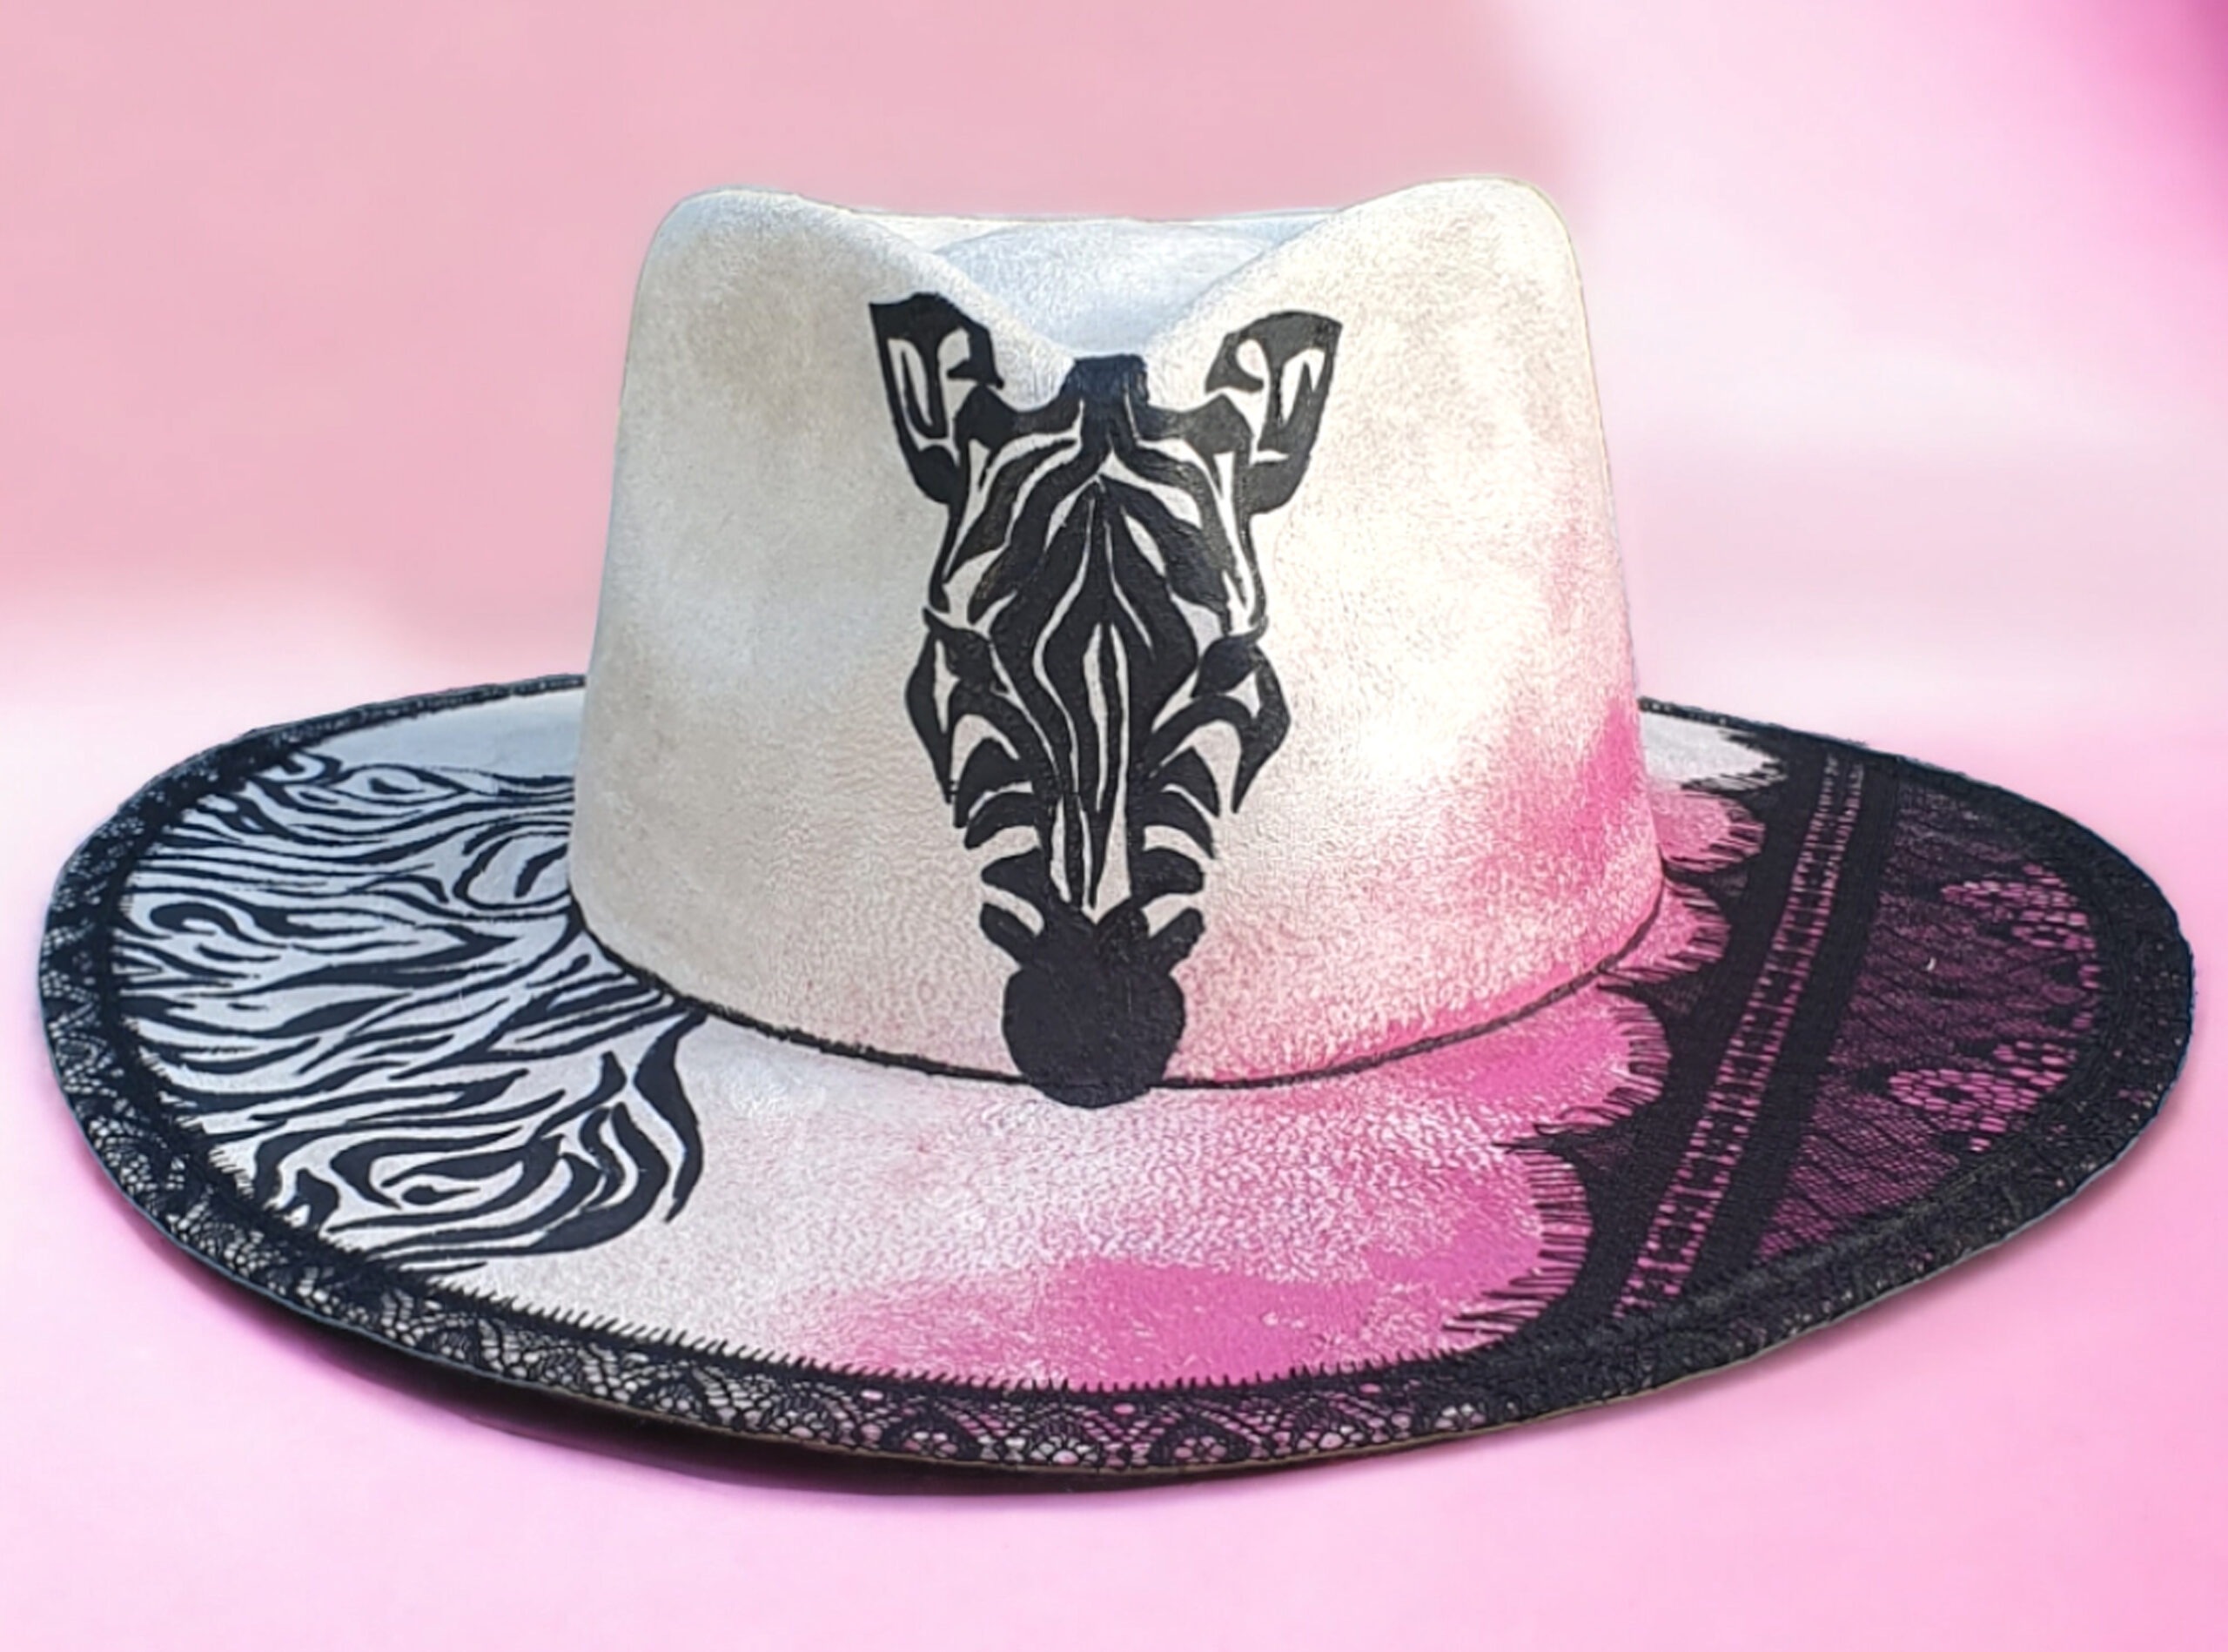 Whitw pink handpainted zebra hat with black lace and painted details